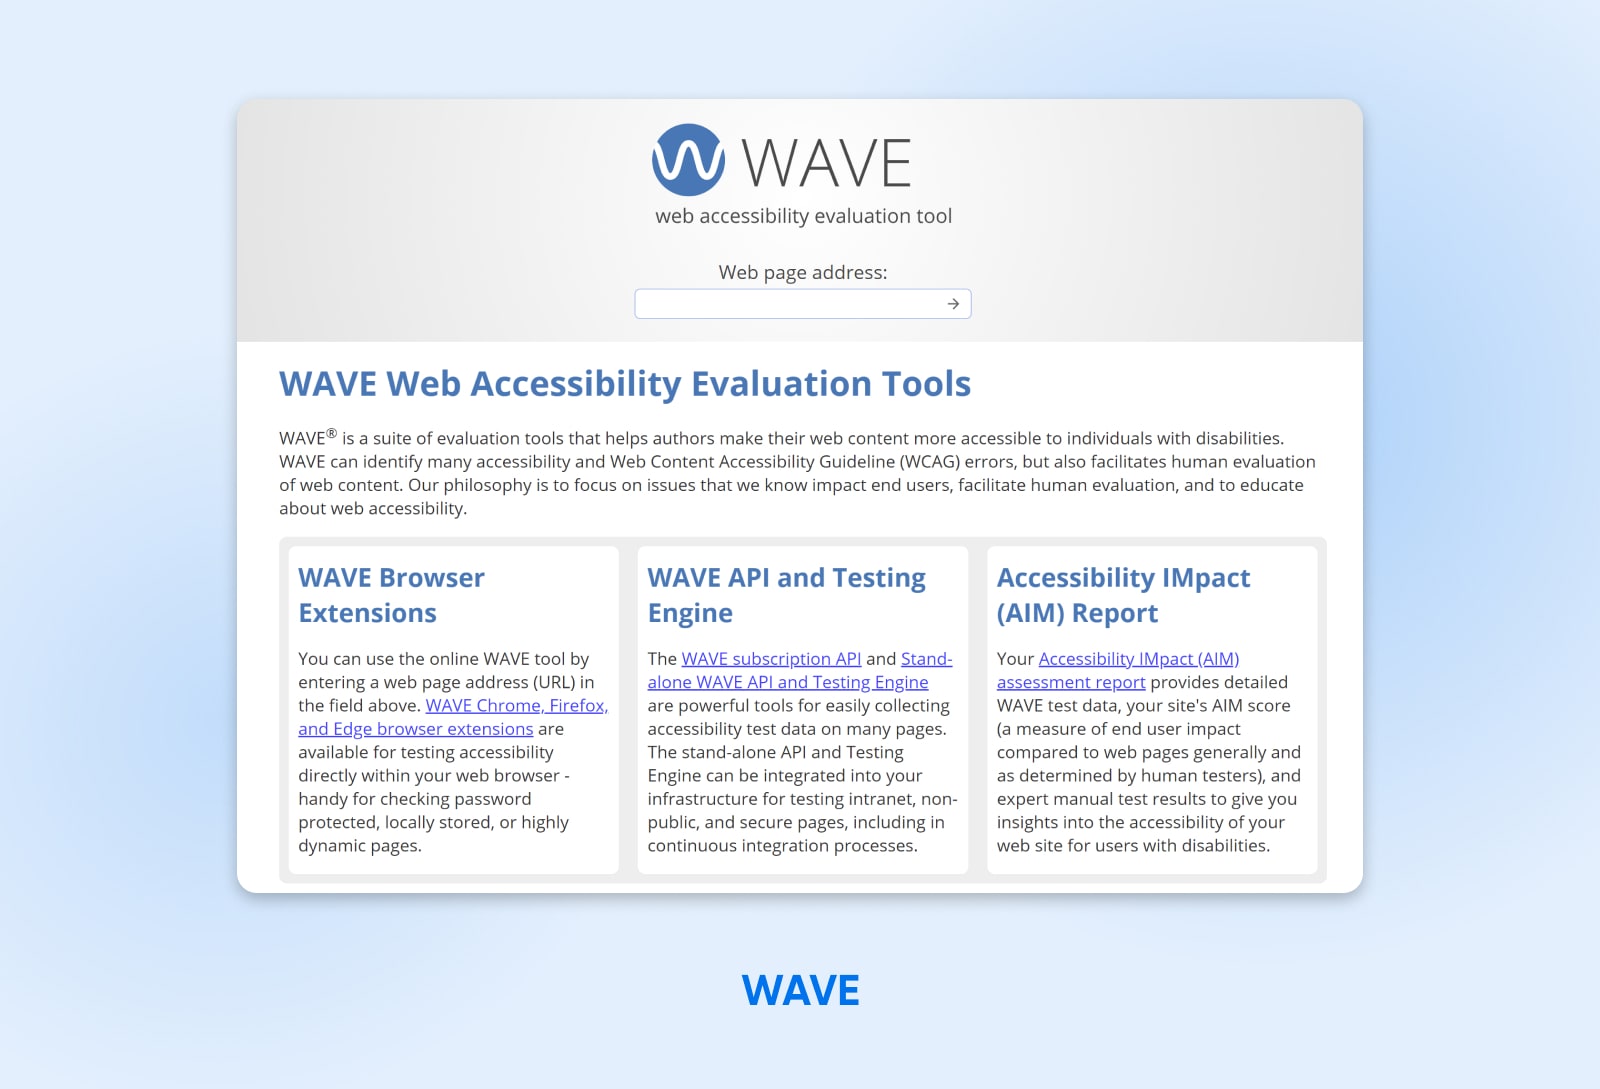 screenshot of the WAVE home page showing various WAVE web accessibility evaluation tools that can be accessed 